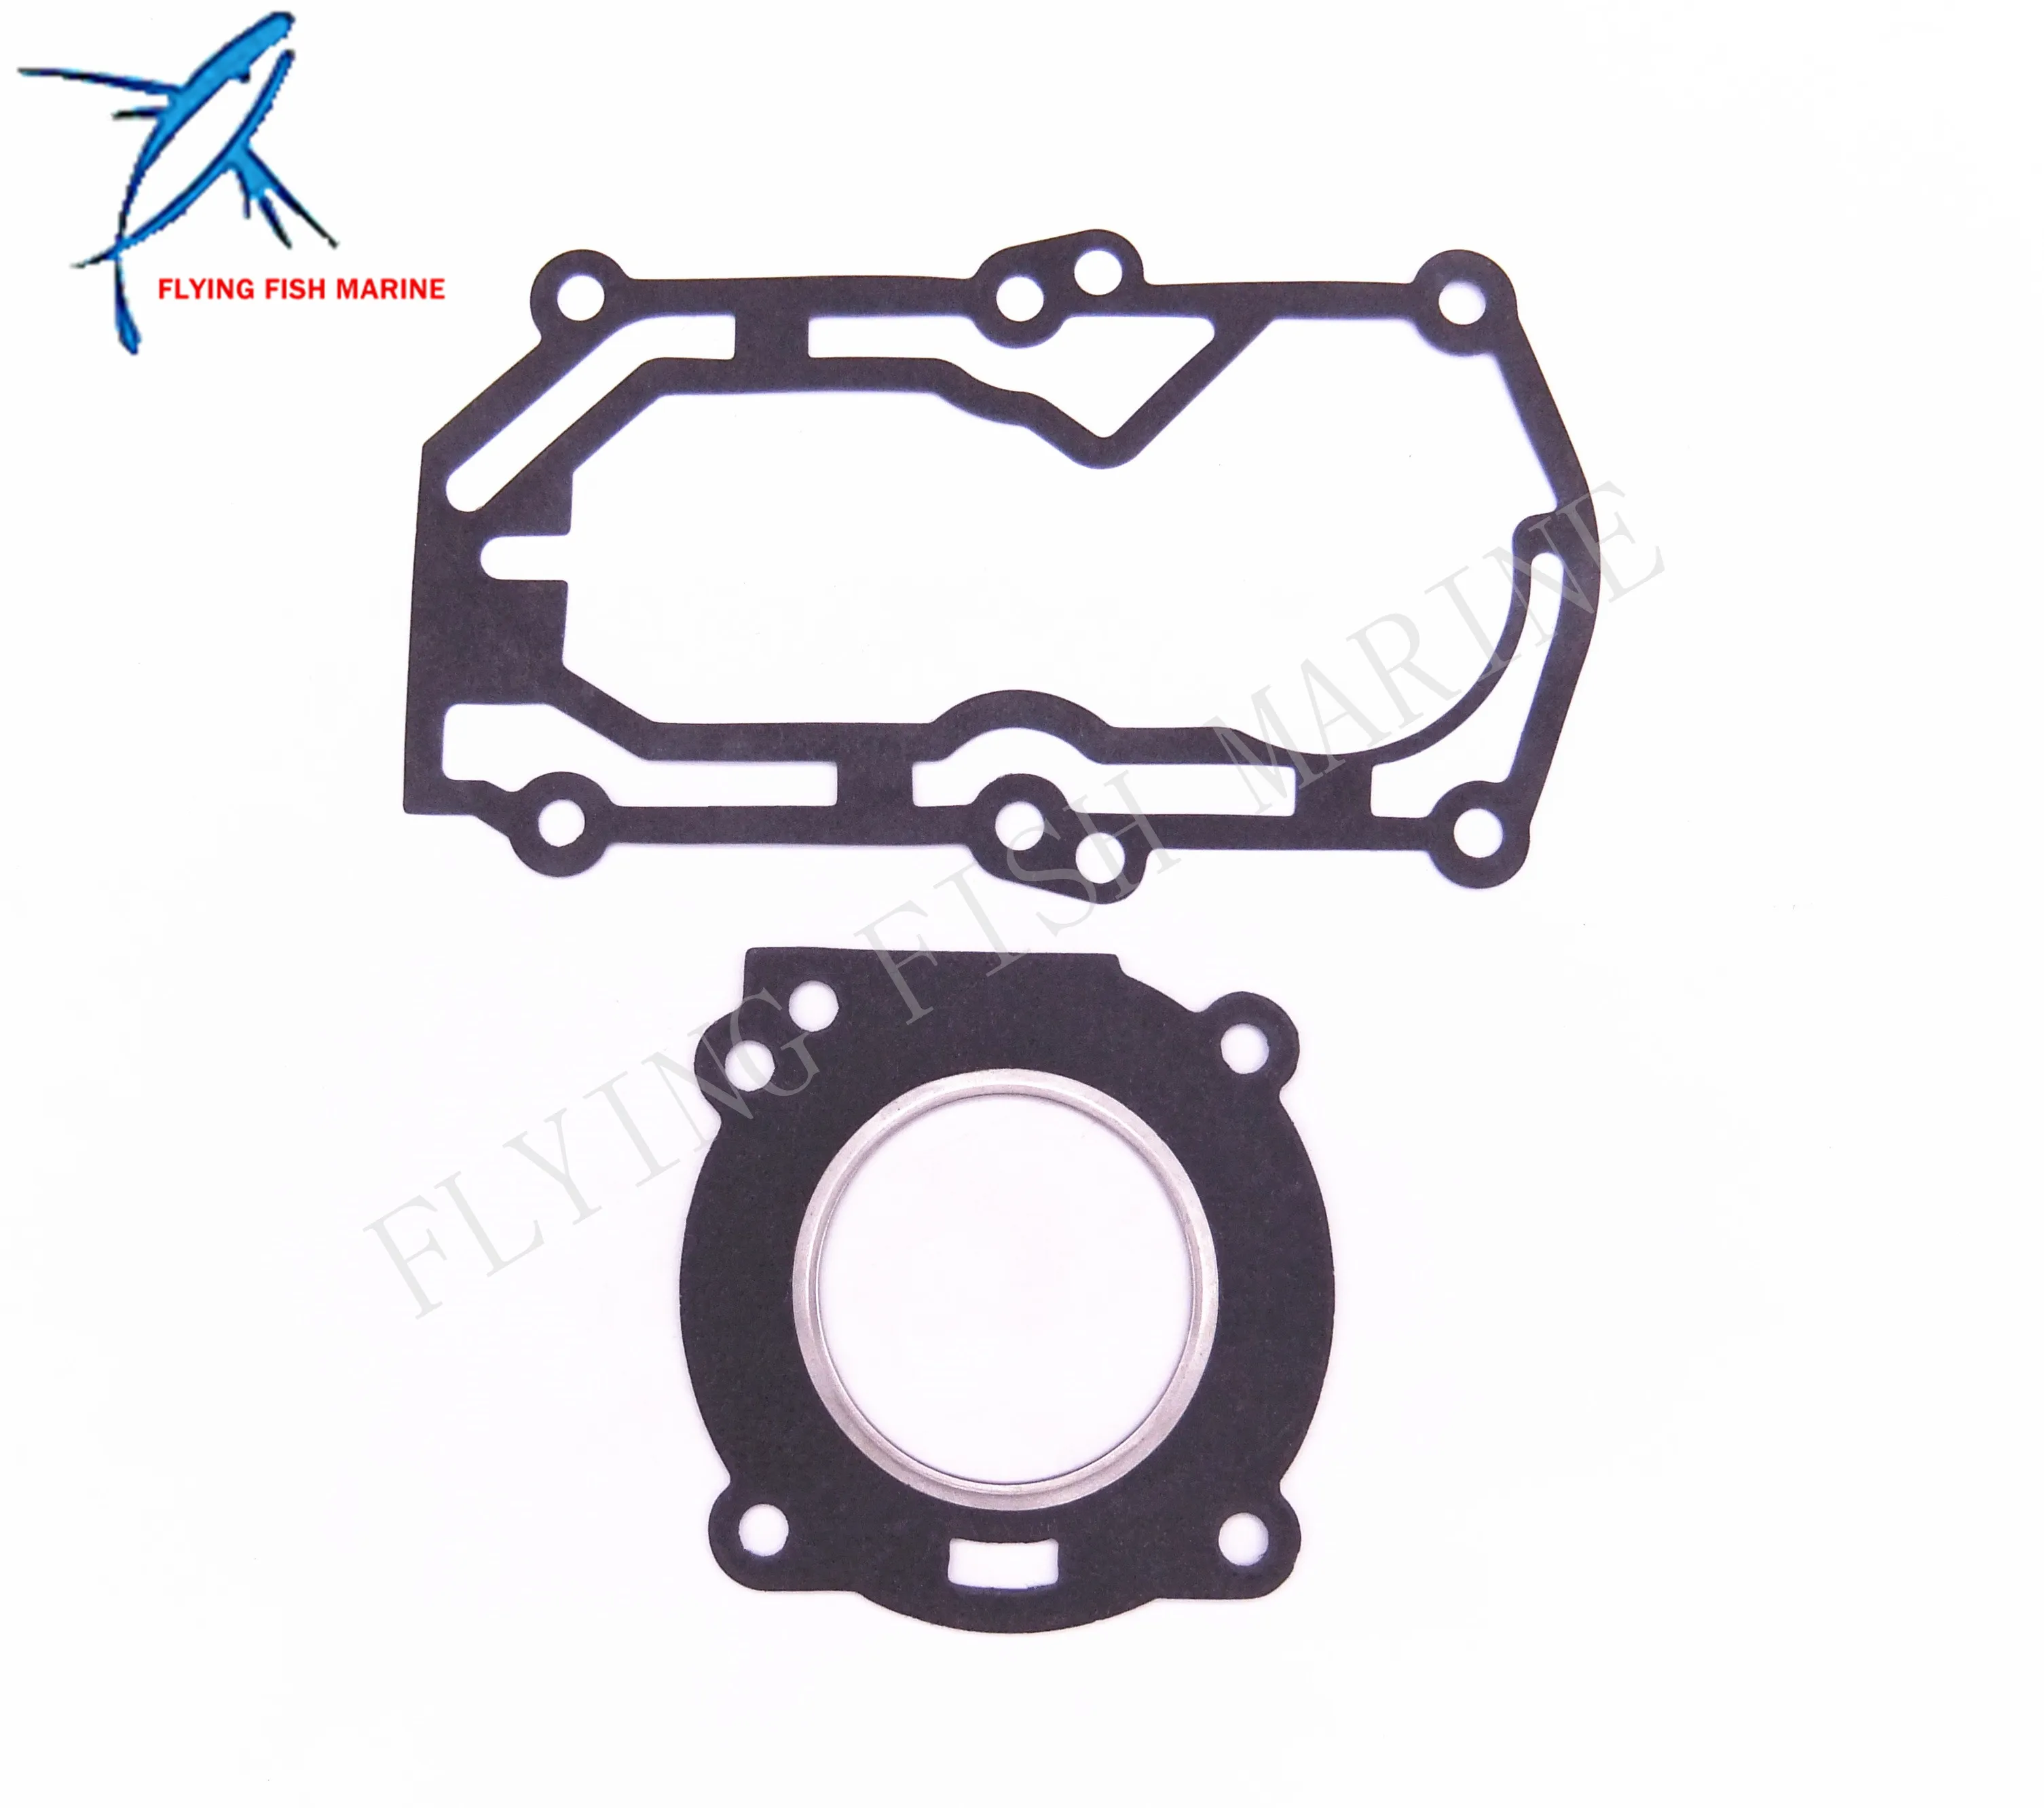 Boat Motor Complete Power Head Seal Gasket Kit for Tohatsu Nissan 2.5HP 3.5HP Outboard Engine